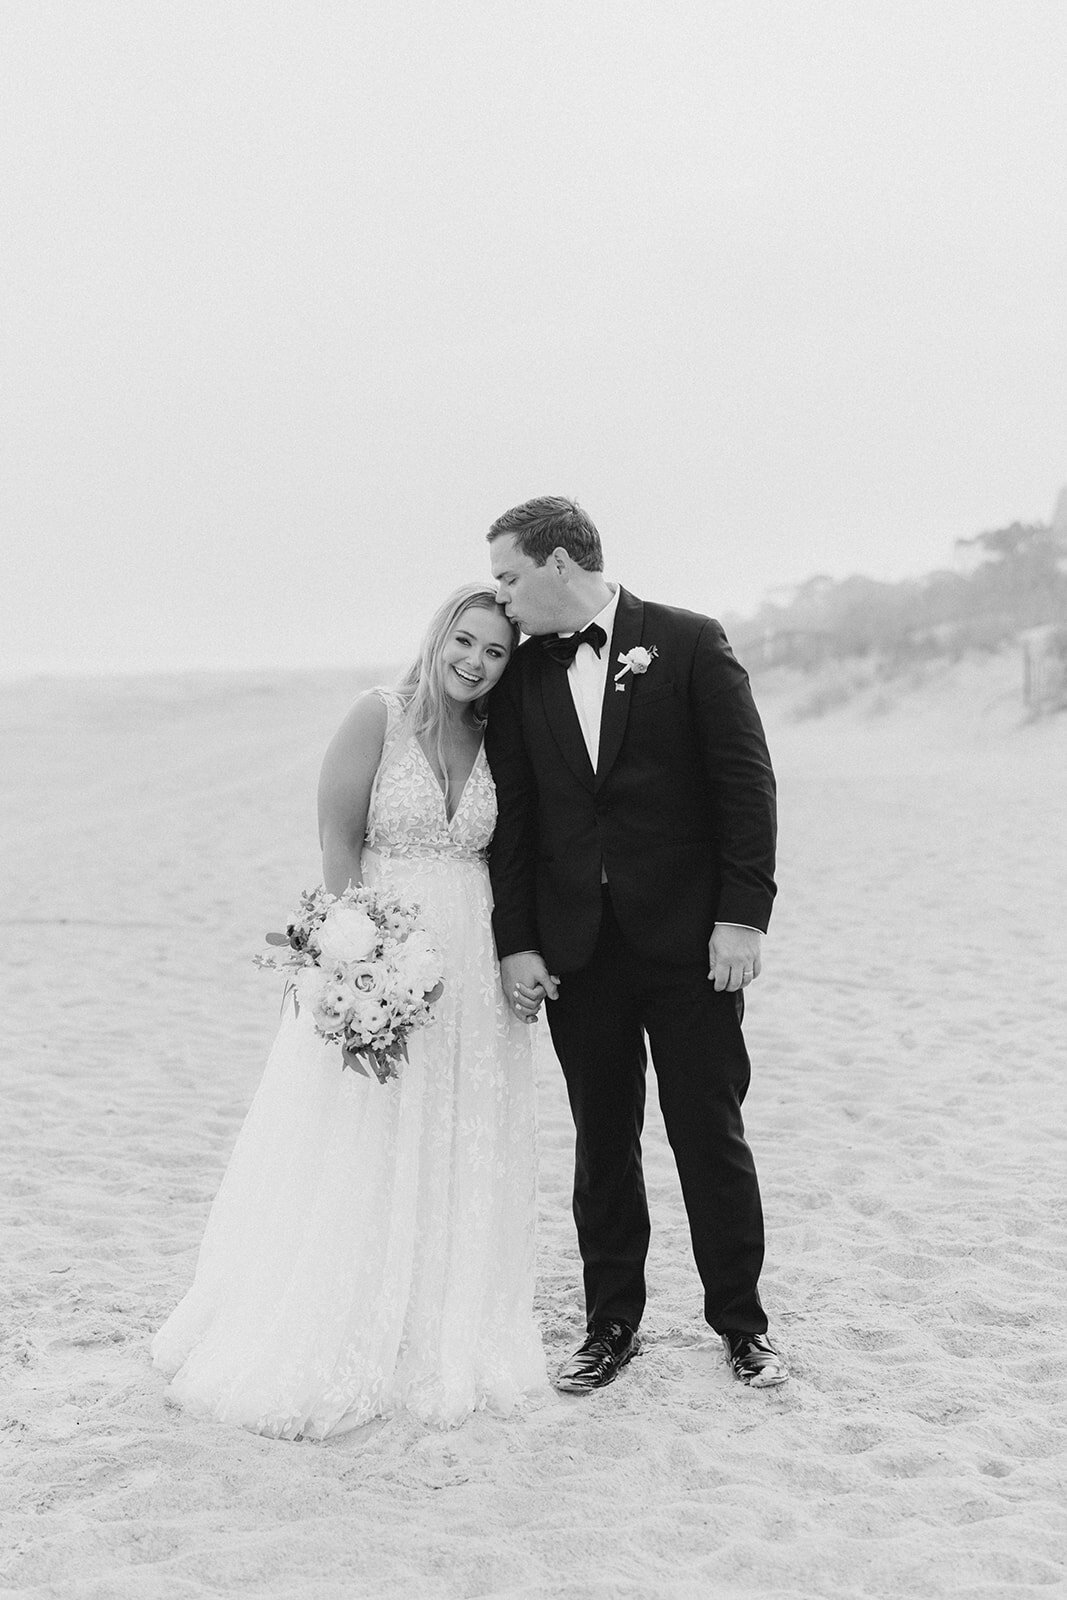 Sea Pines fall wedding. Bride and groom black and white portrait on the beach. Kailee DiMeglio Photography, Charleston, SC based destination wedding photographer.